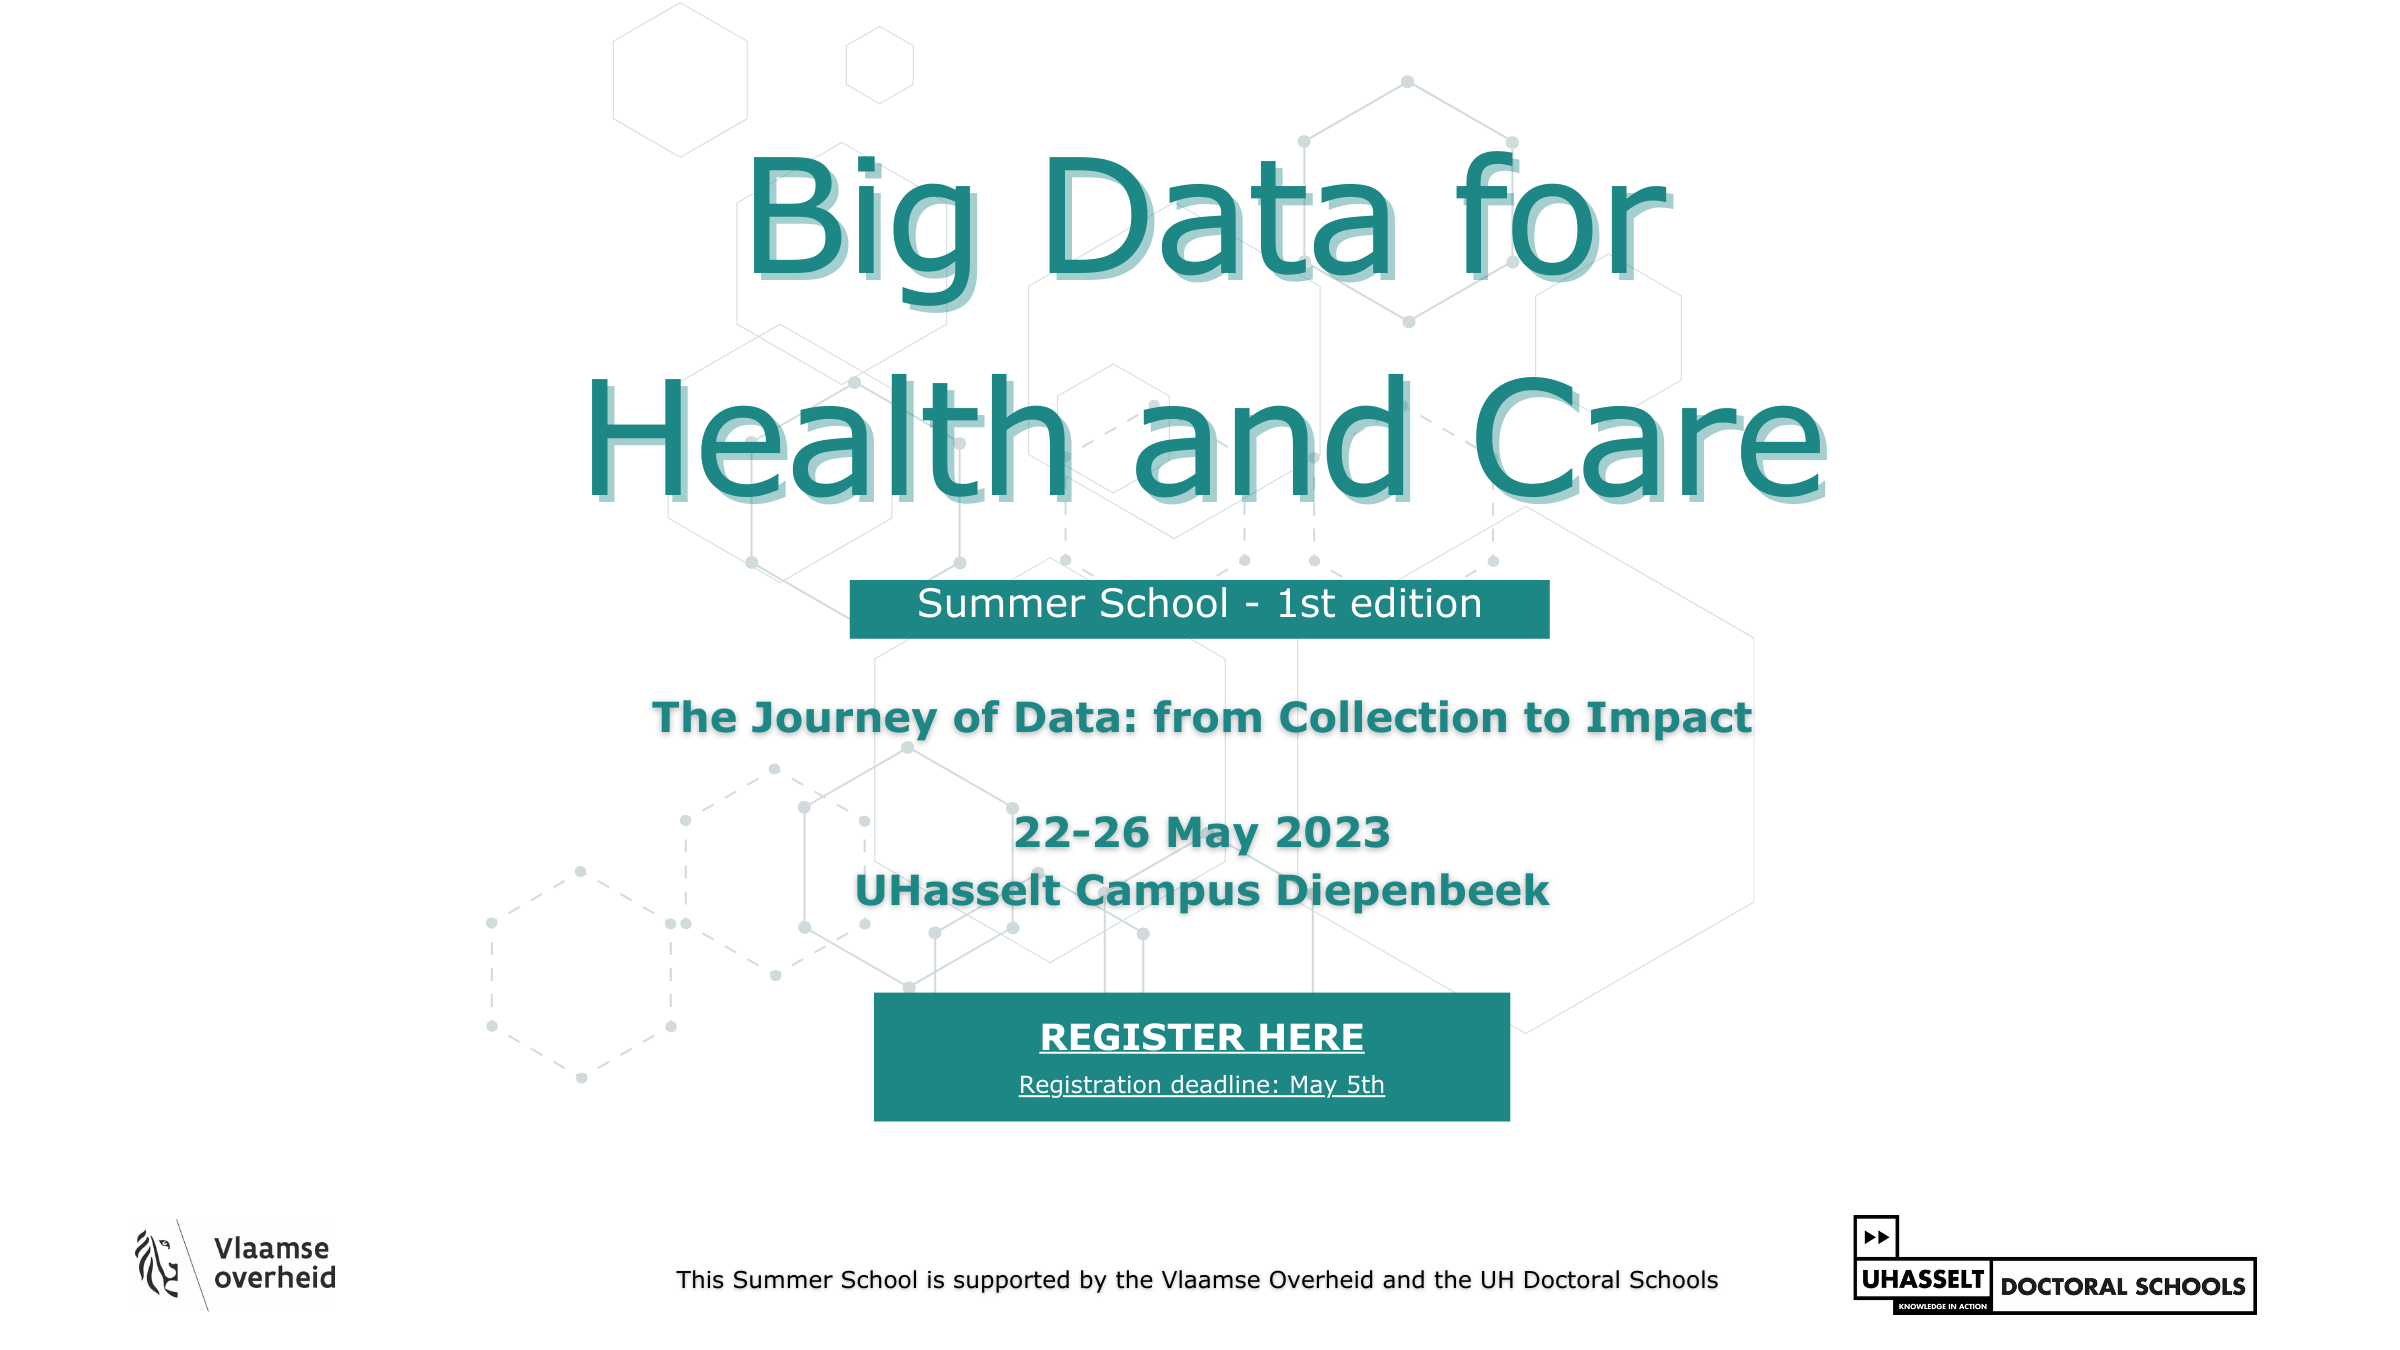 Big Data for Health and Care